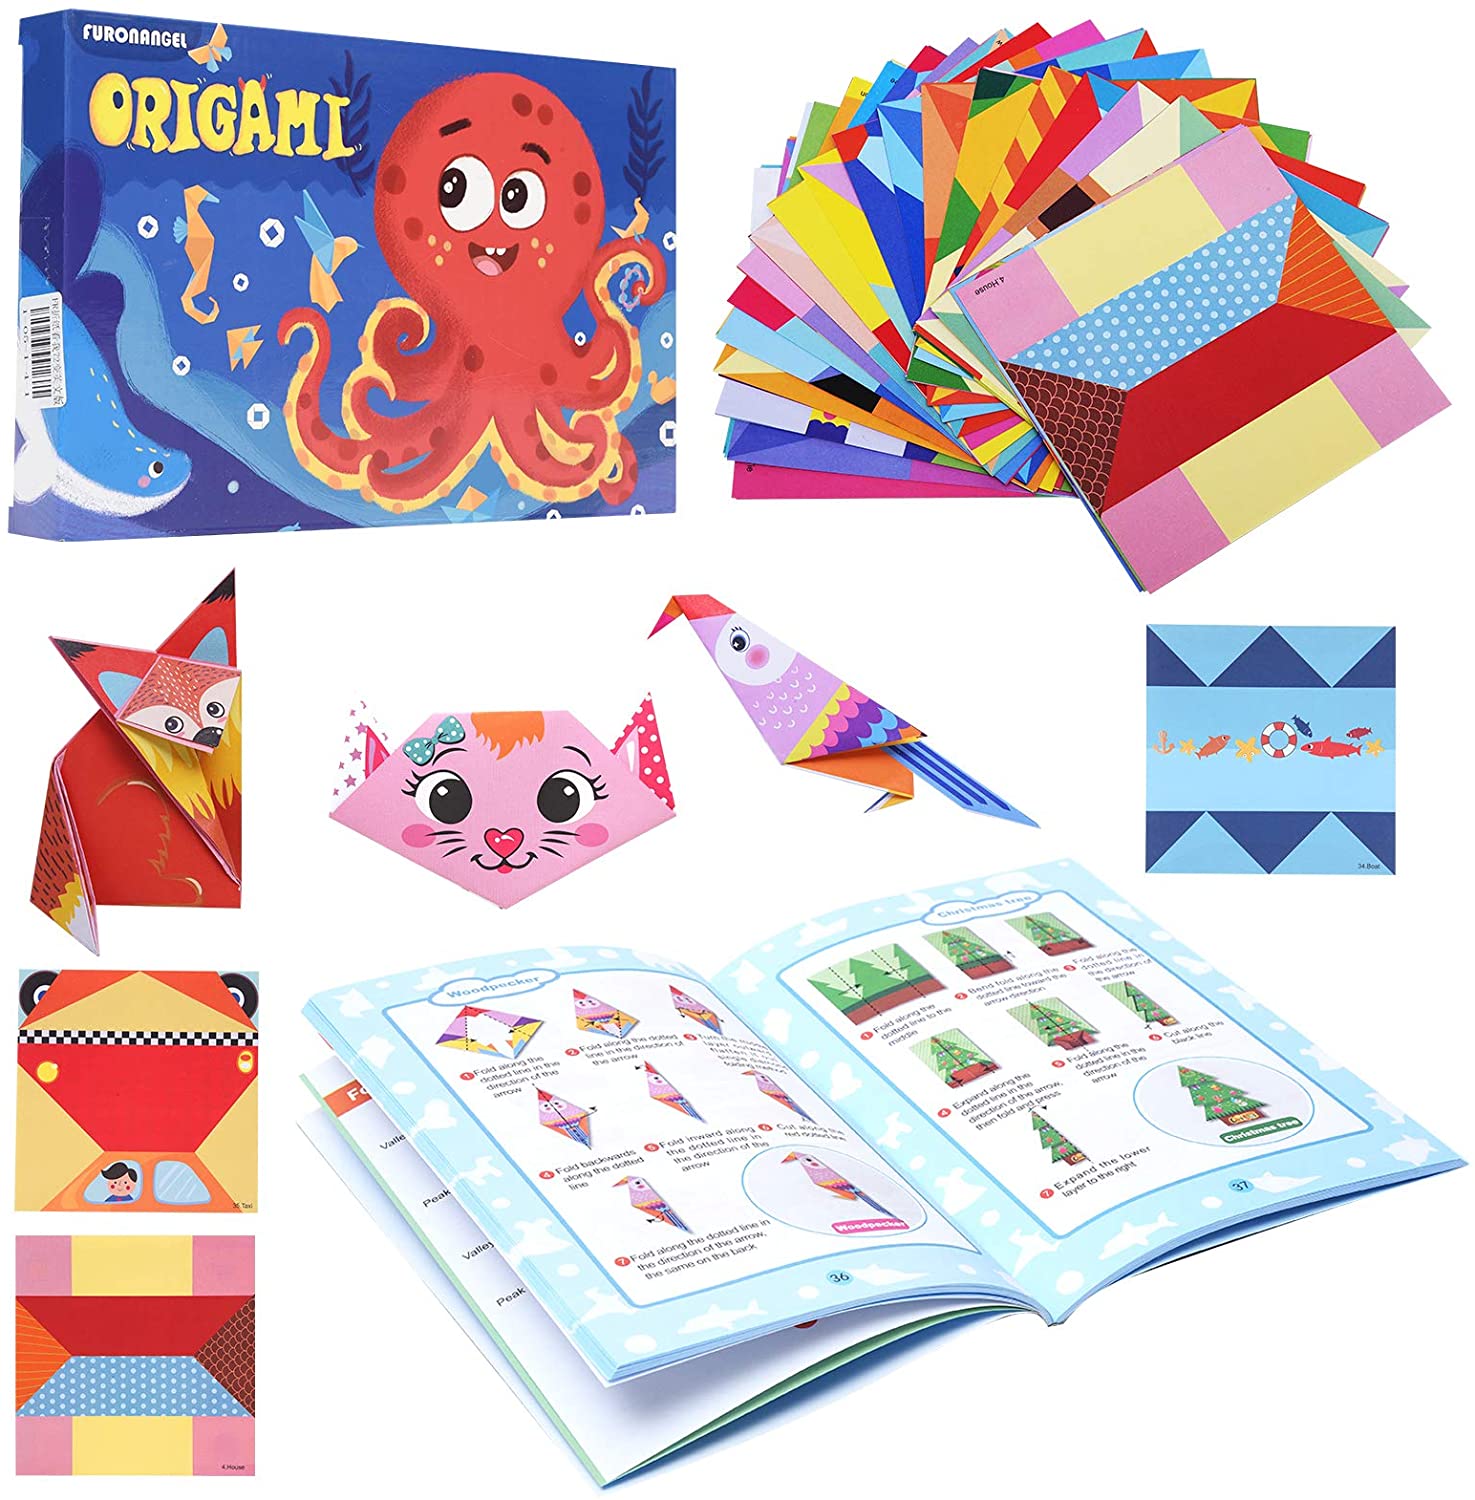 Lnkoo 152 Sheets Colorful Kids Origami Kit Double Sided Vivid Origami Papers Projects Pages Instructional Origami Book for Kids Adults Beginners